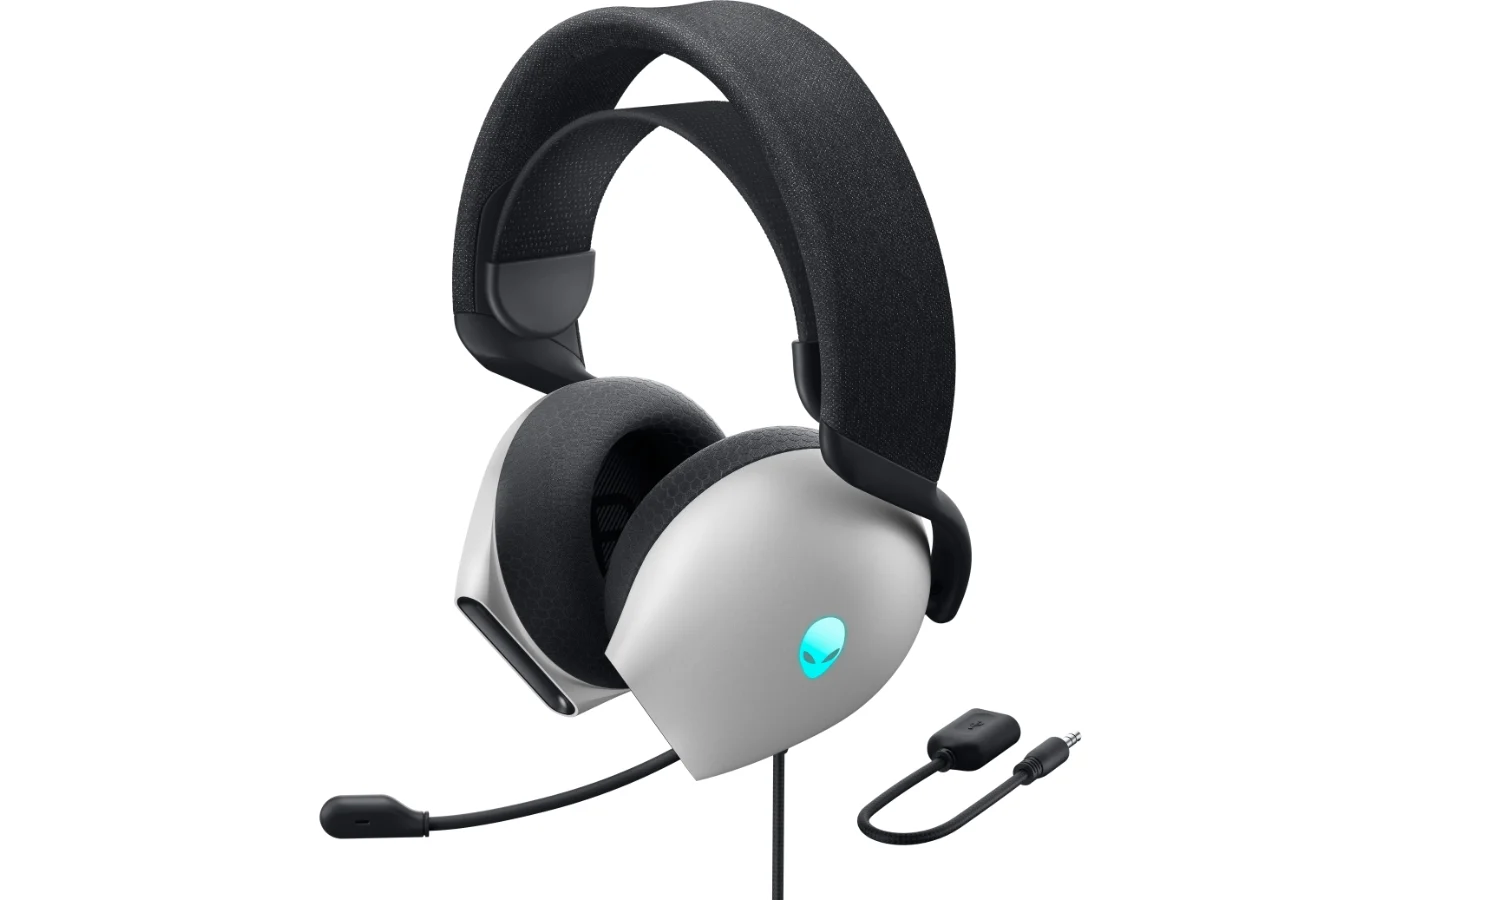 Product image of Alienware wired gaming headset, taken from front left, with glowing blue alien logo on left side.  White background.